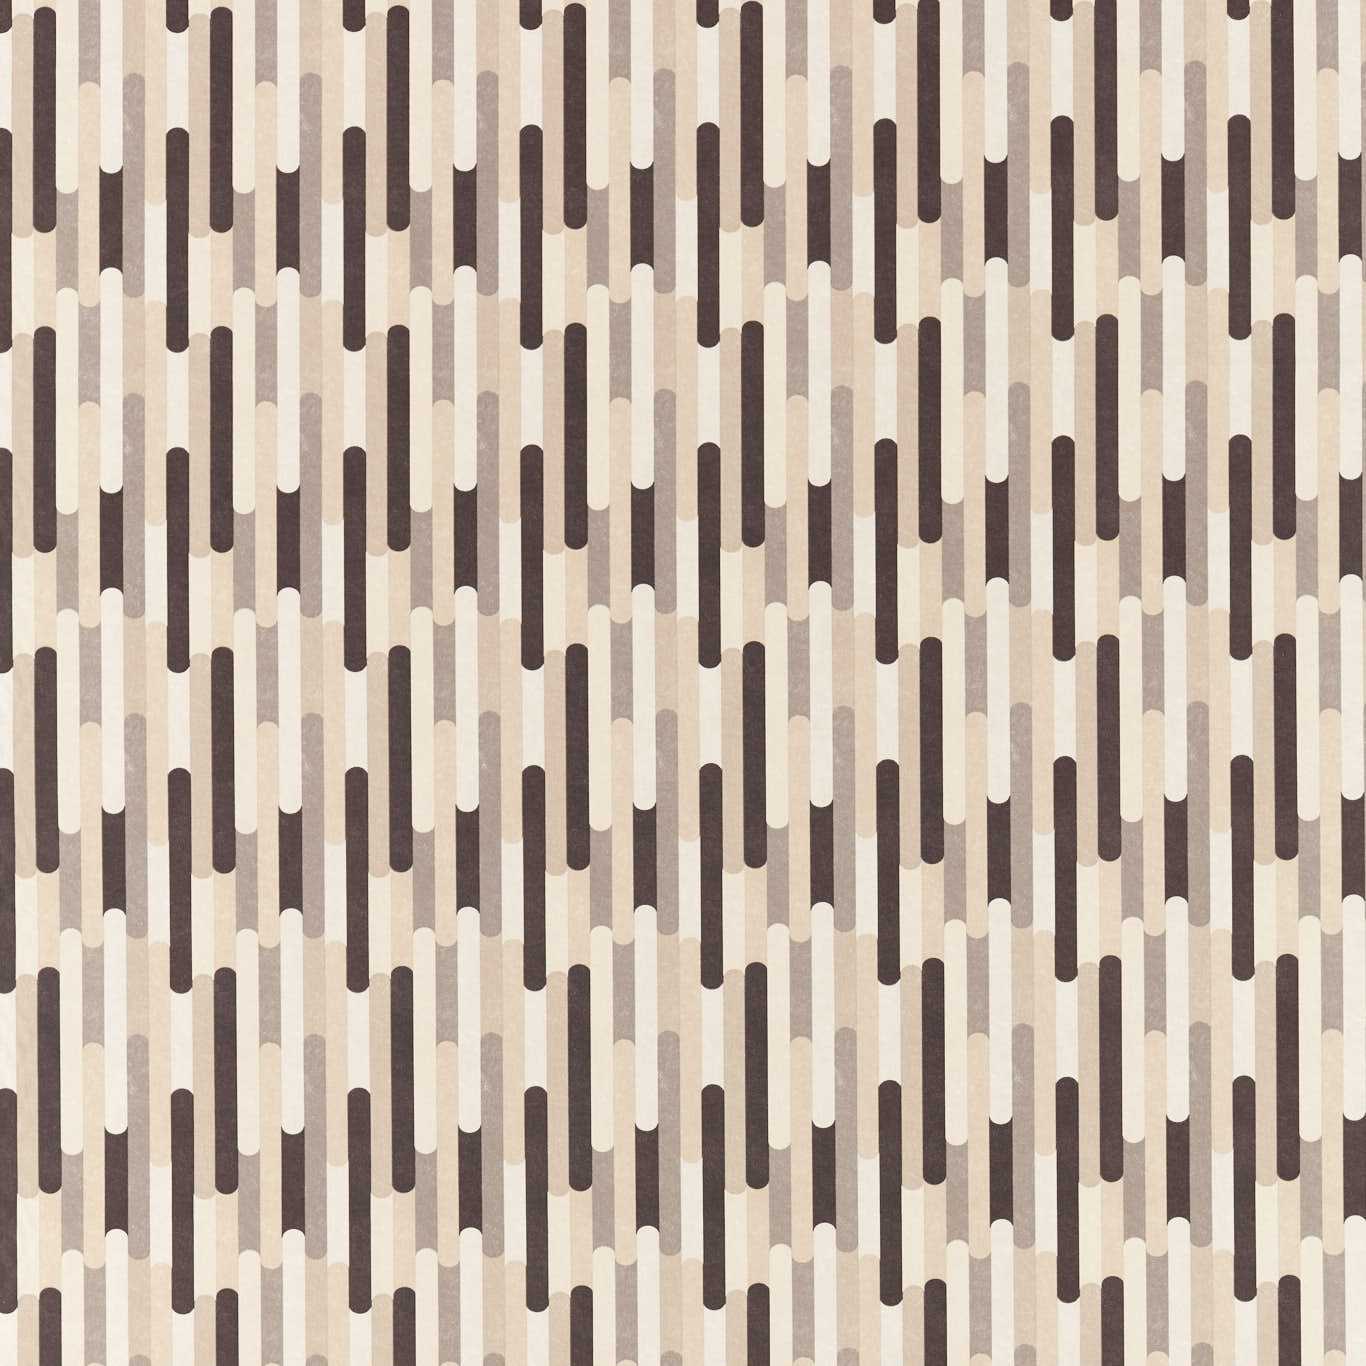 Seattle Monochrome Fabric by STG